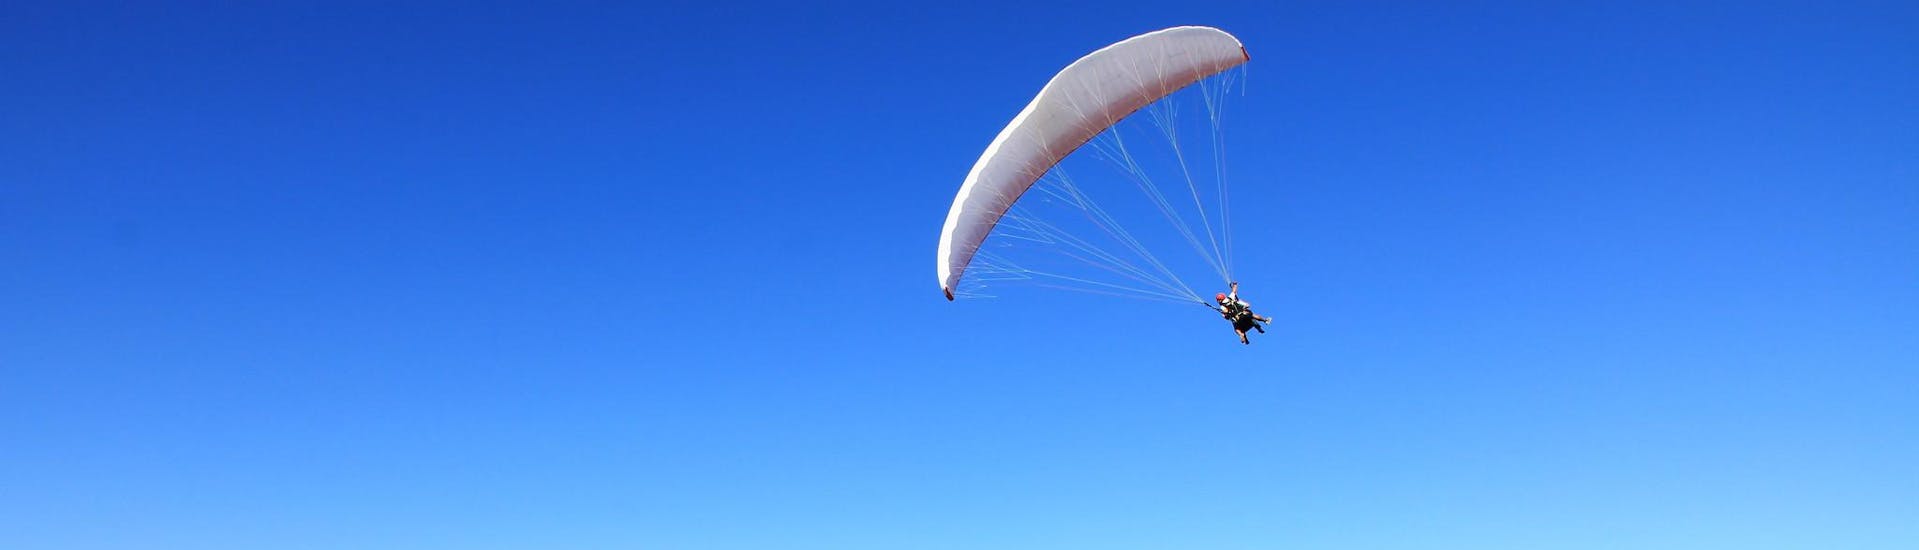 Two people taking a thermal paragliding flight.